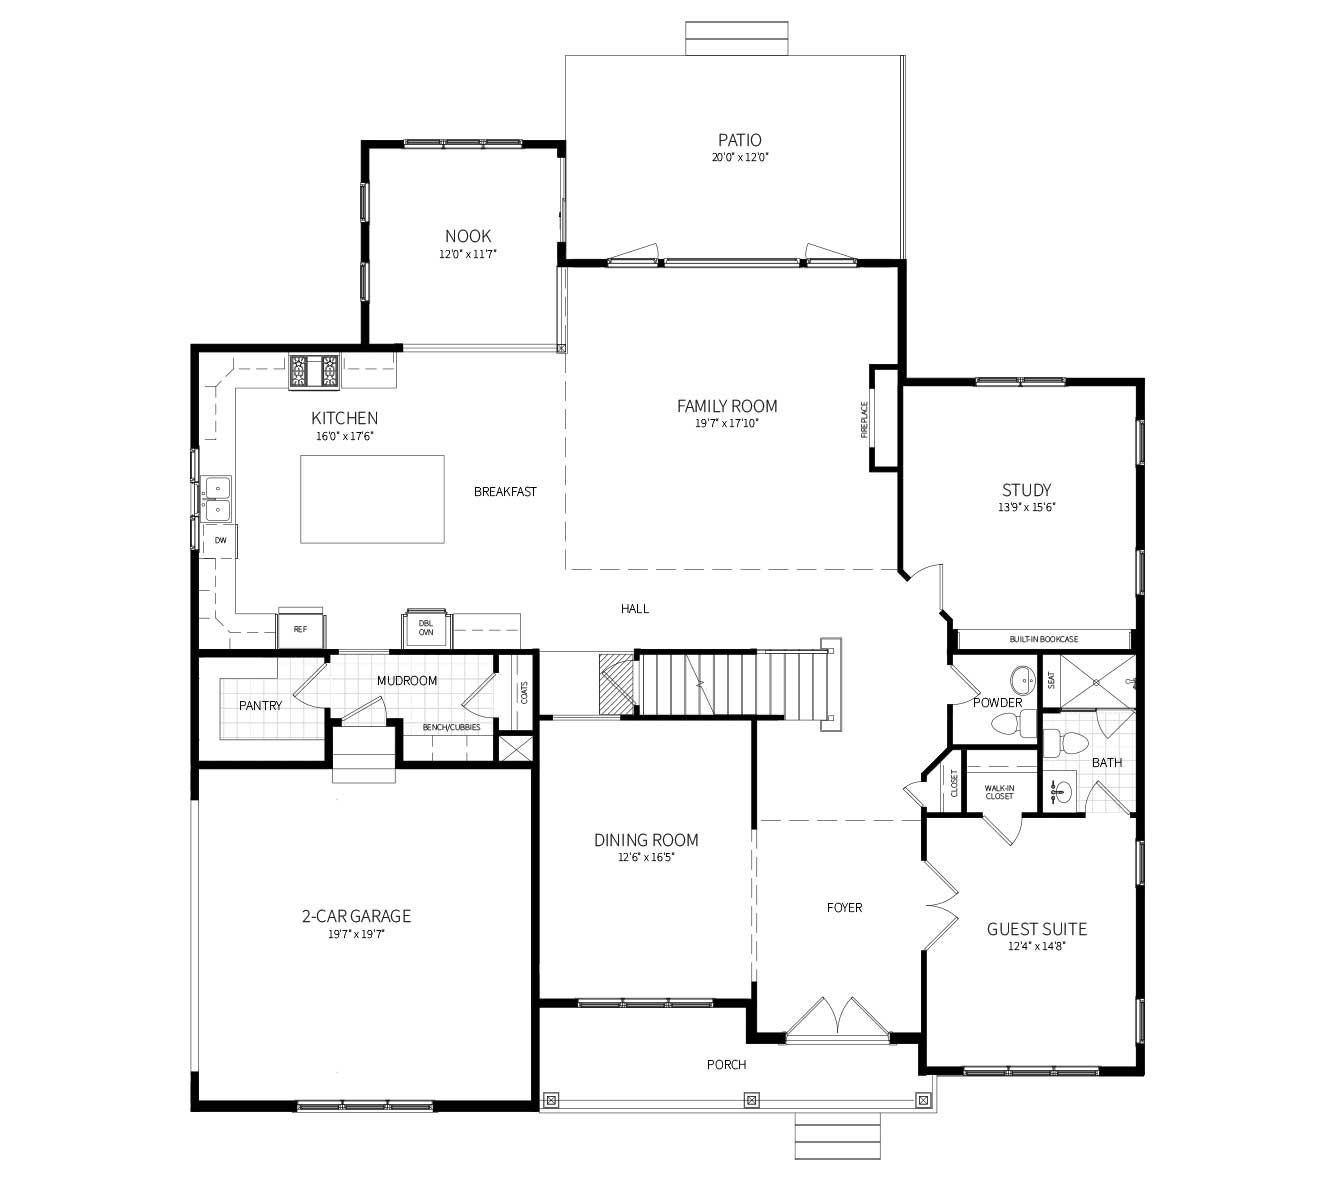 First floor plan for the home proposed for 10301 South Glen Rd - including 1st floor guest suite w/ bath, 2-car sideload garage